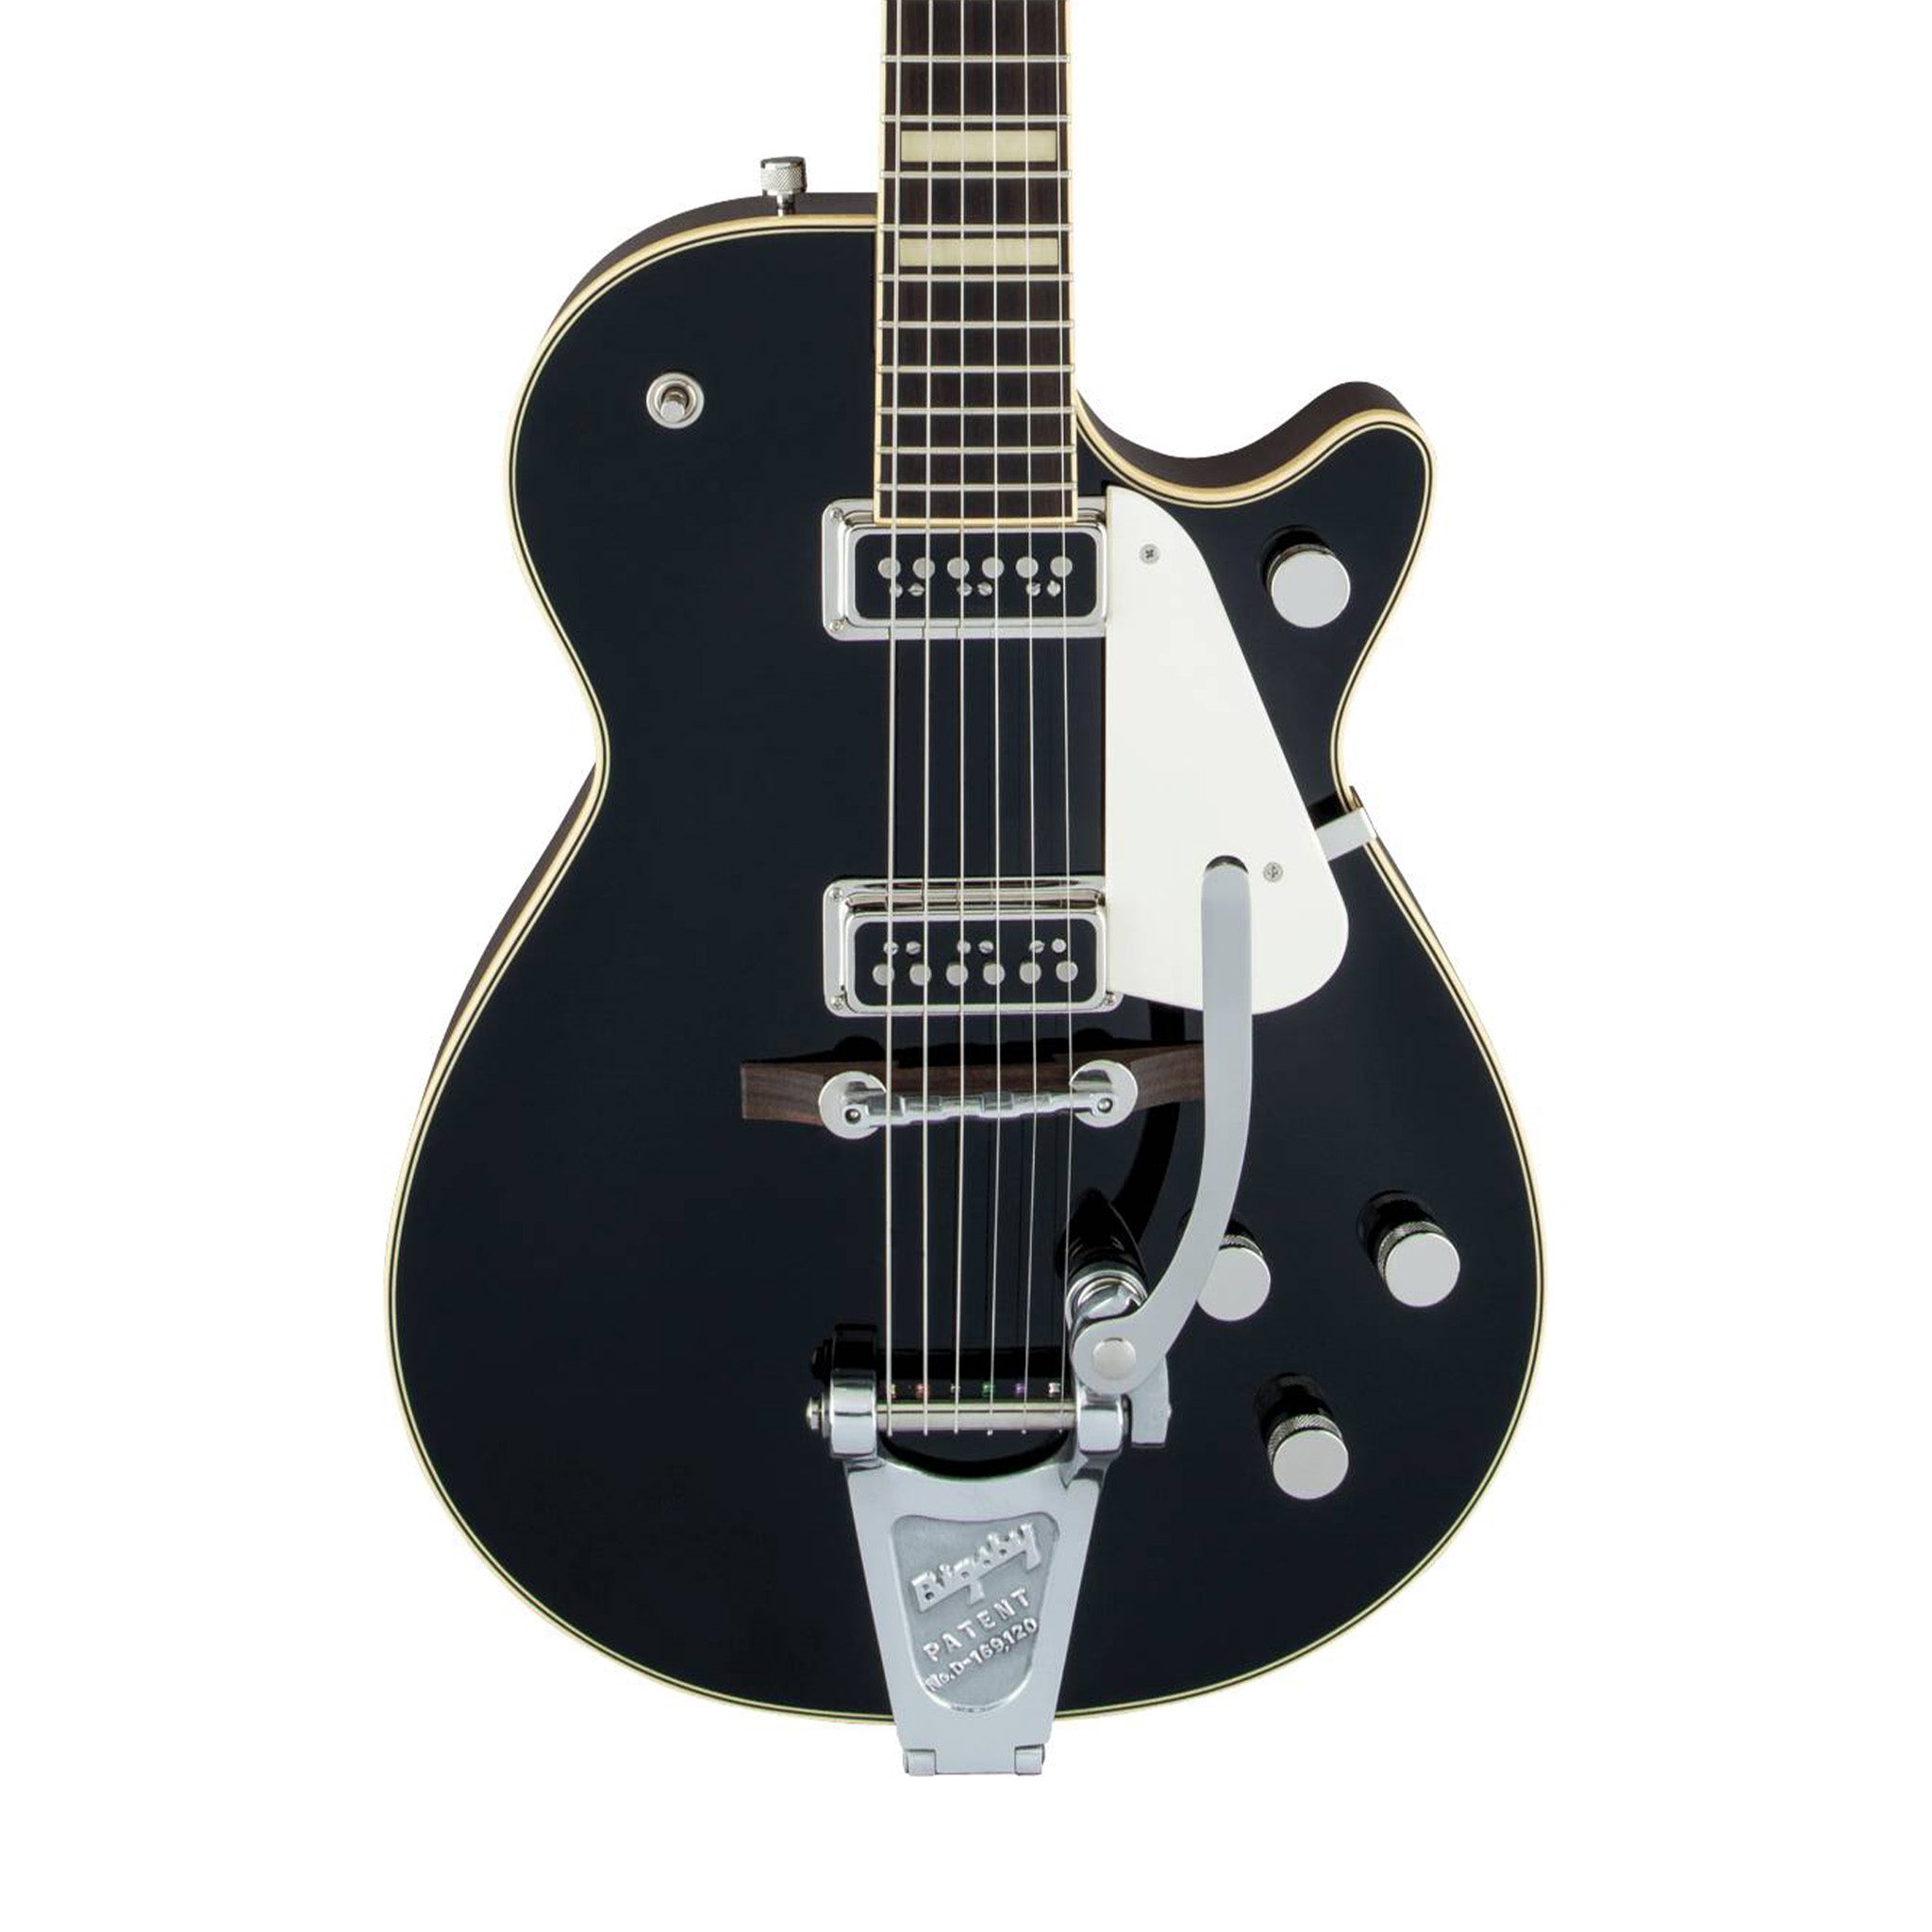 Gretsch G6128T-53 Vintage Select 53 Duo Jet Electric Guitar w/ Bigsby, Black | Zoso Music Sdn Bhd